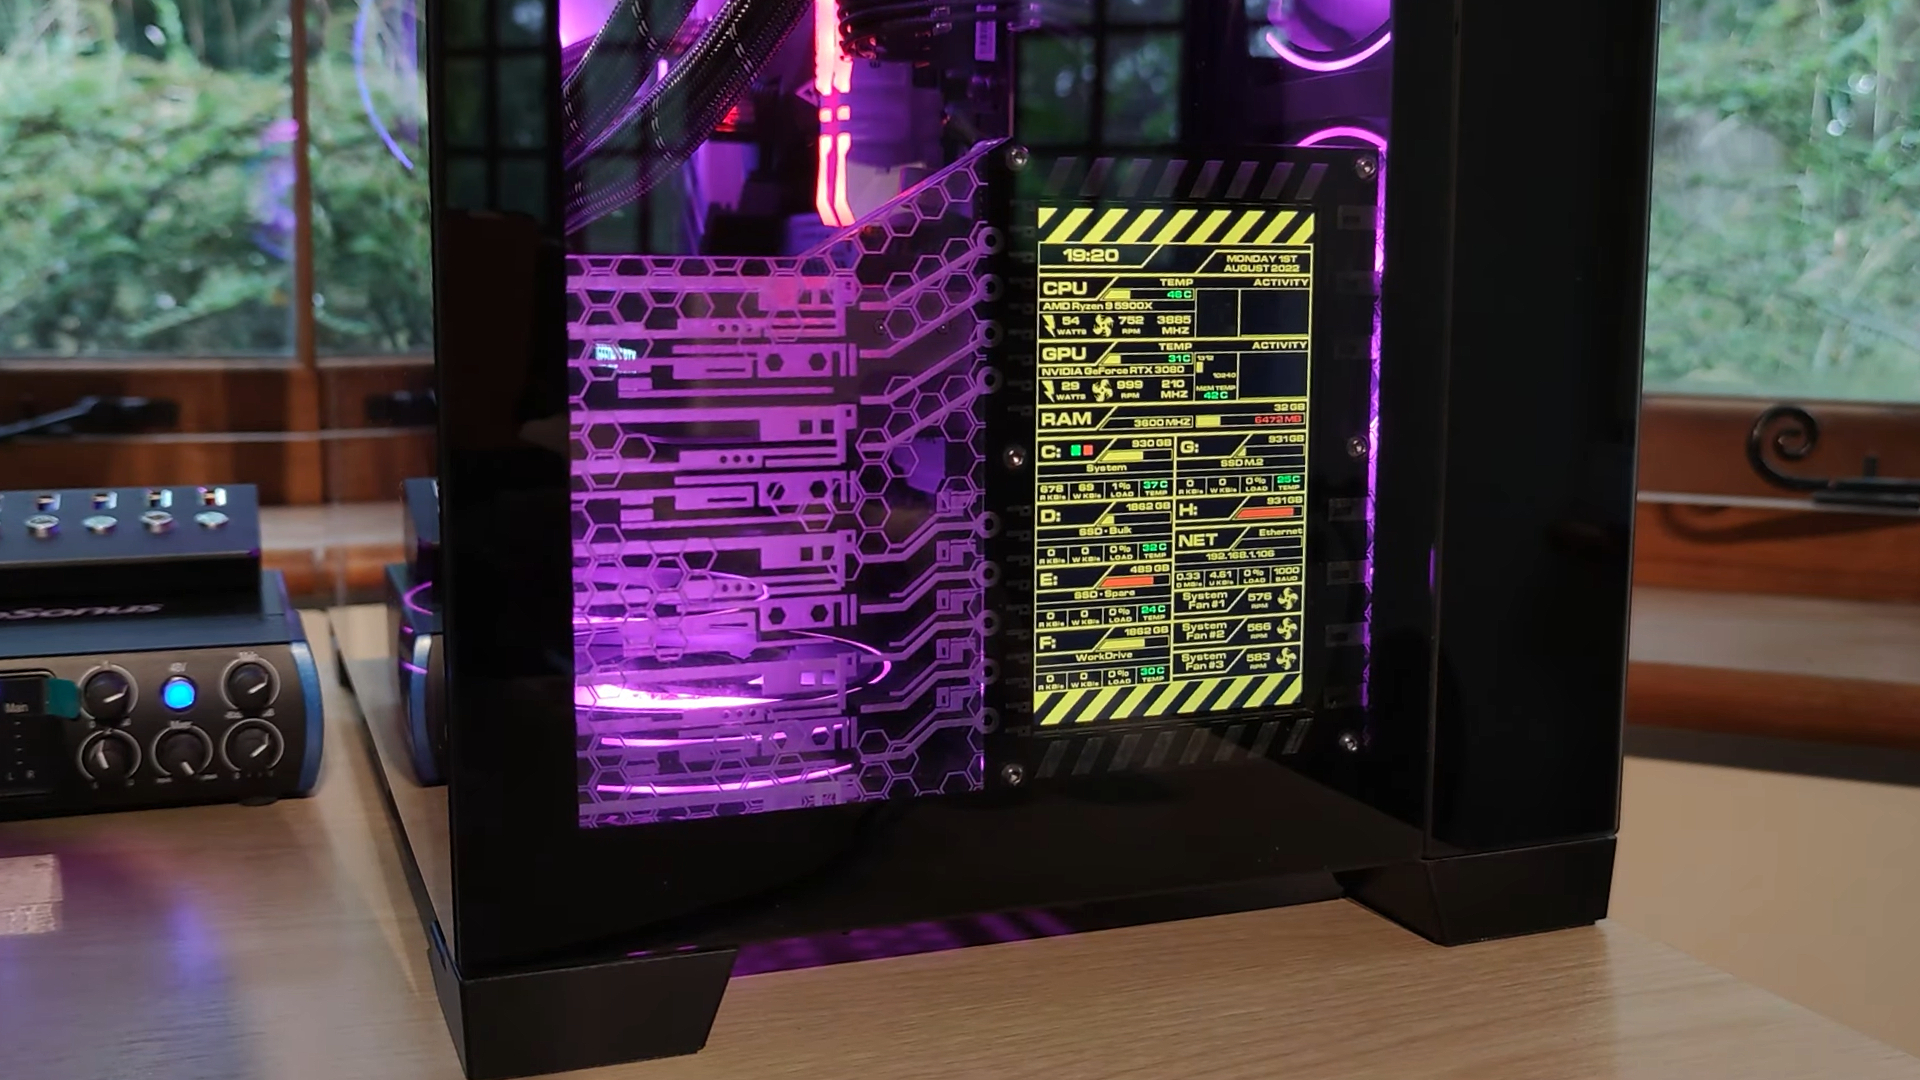 This Nvidia RTX gaming PC with a Star Trek screen is a sci-fi dream